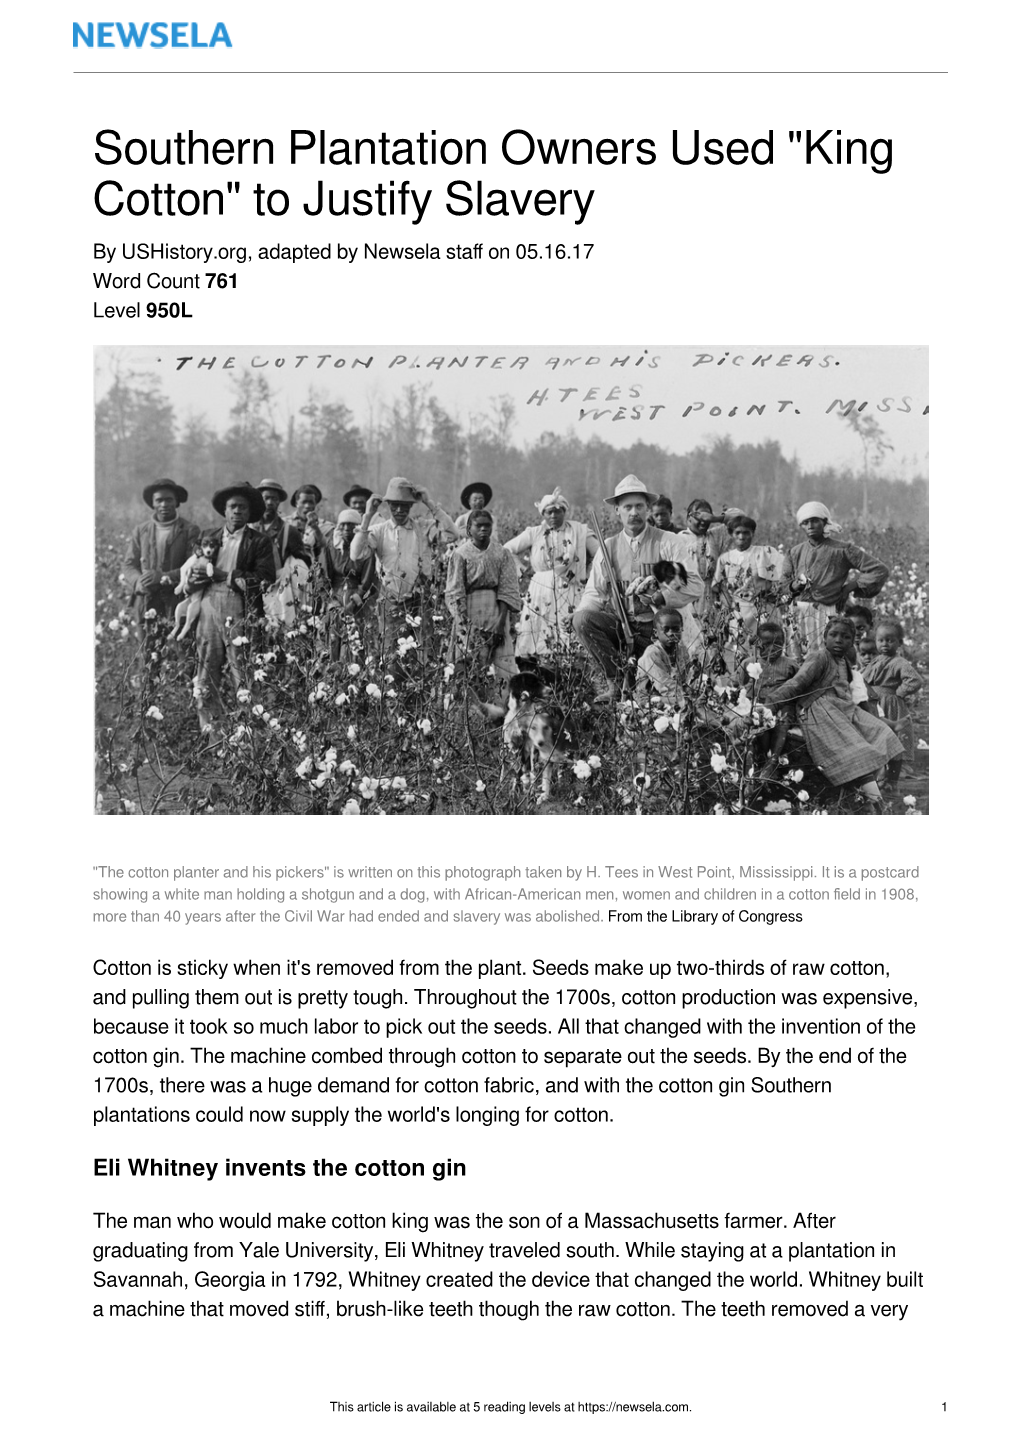 Southern Plantation Owners Used "King Cotton" to Justify Slavery by Ushistory.Org, Adapted by Newsela Staﬀ on 05.16.17 Word Count 761 Level 950L